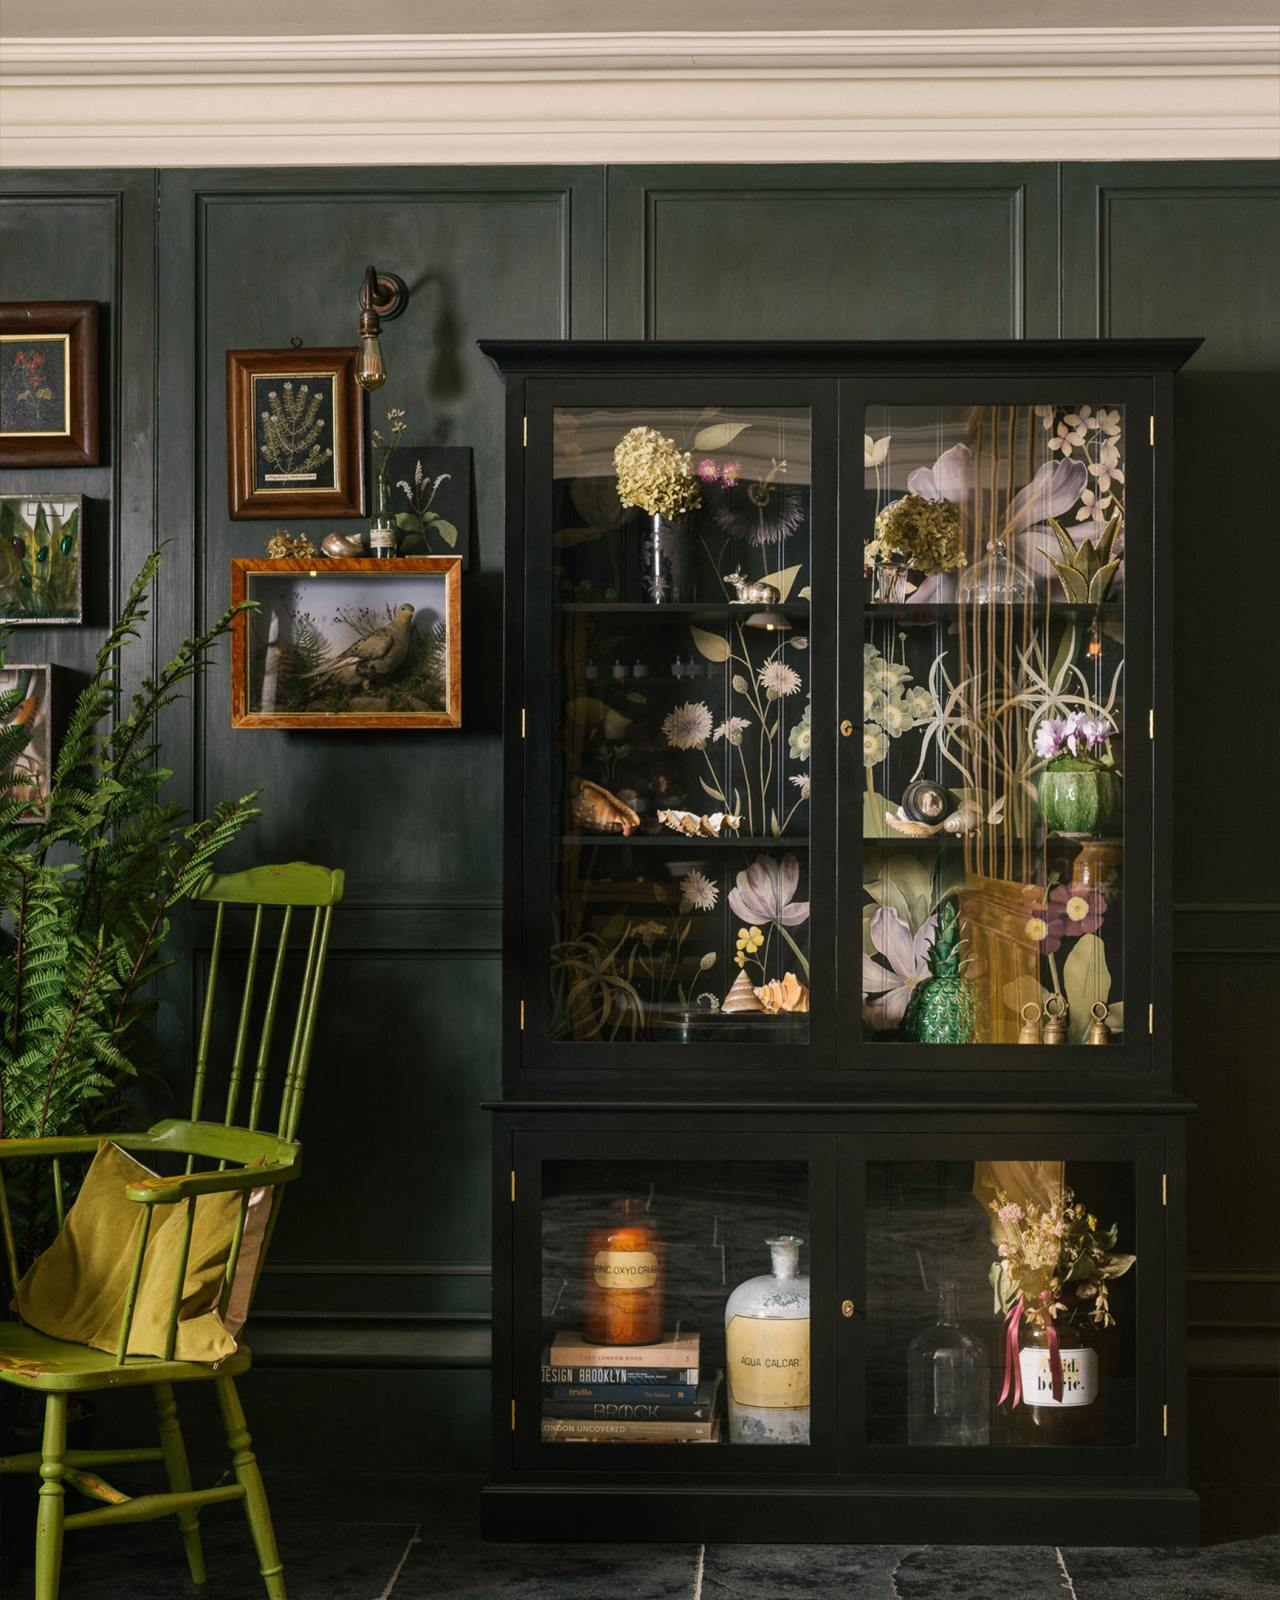 The Botanical Decorated Cupboard, deVOL. Beeautiful handpainted design inside a lovely English country bespoke cabinet with glass doors. #devolkitchens